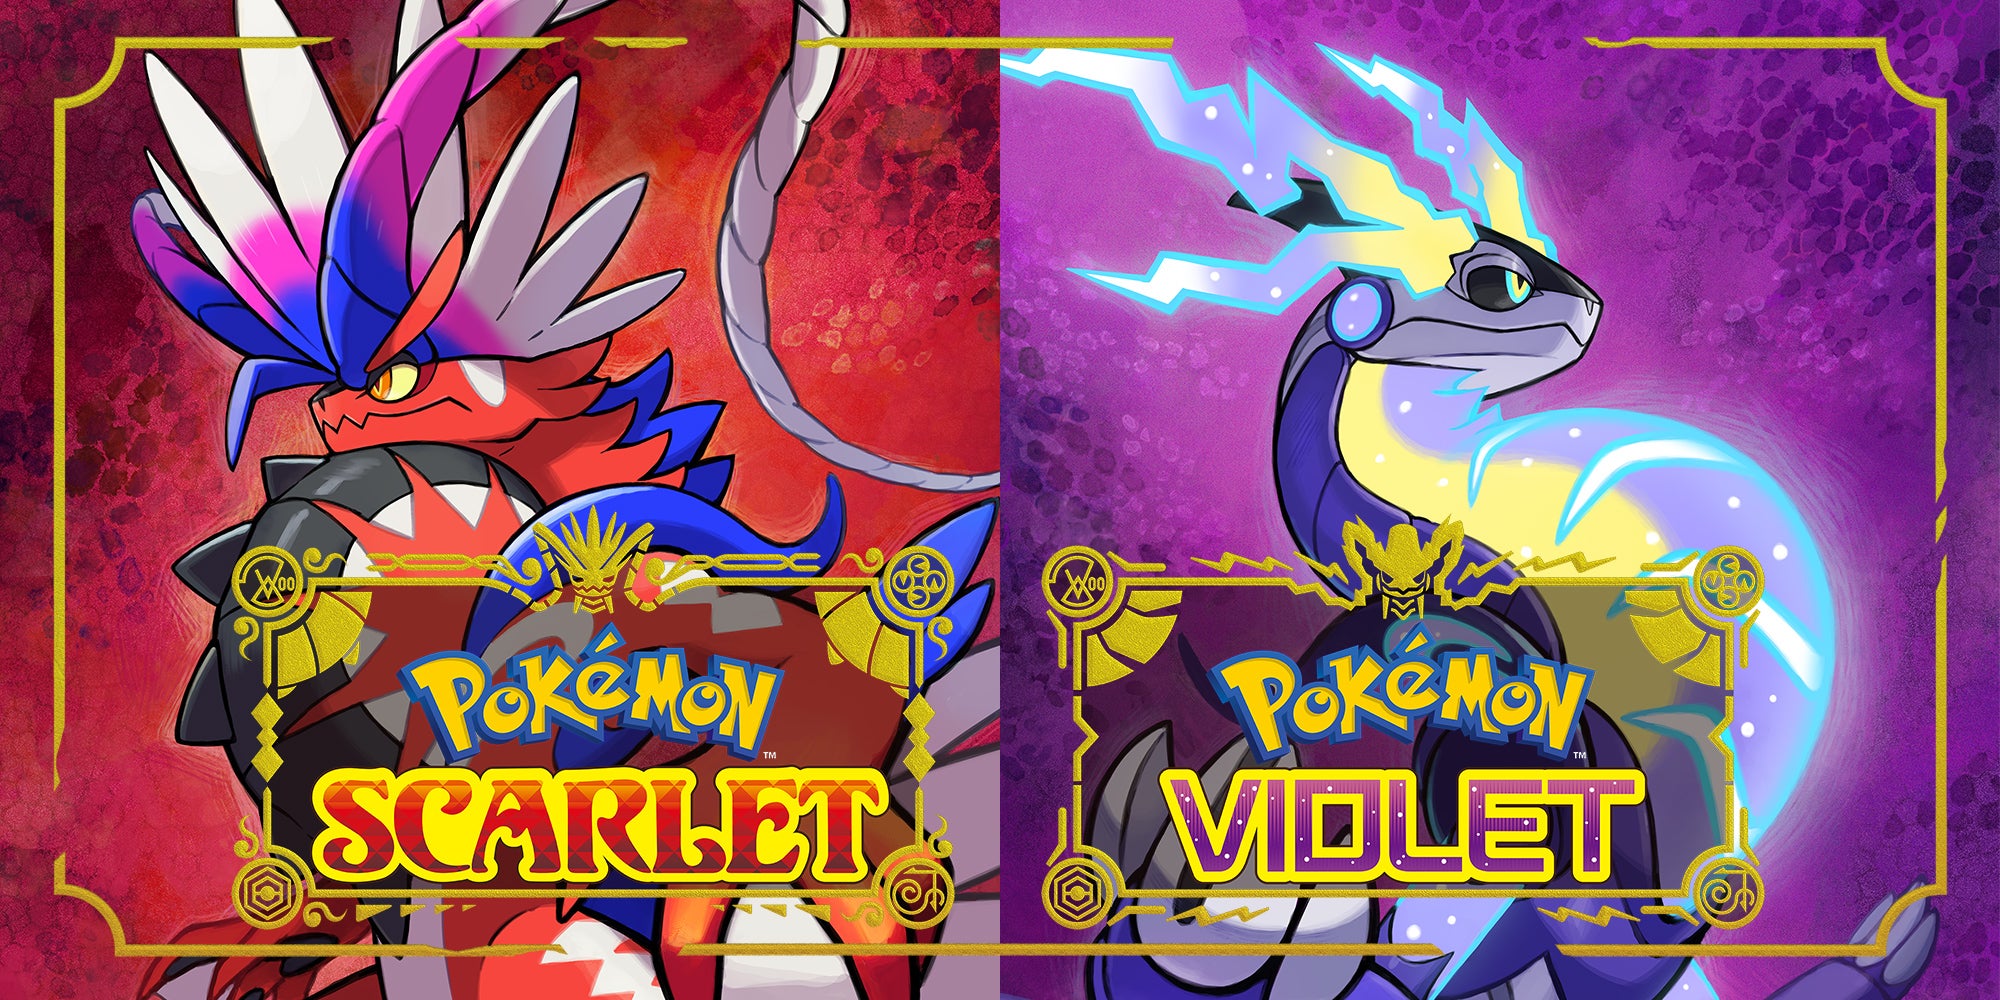 Image for Grab one of the latest Pokemon Scarlet and Violet games from Currys for £37.99